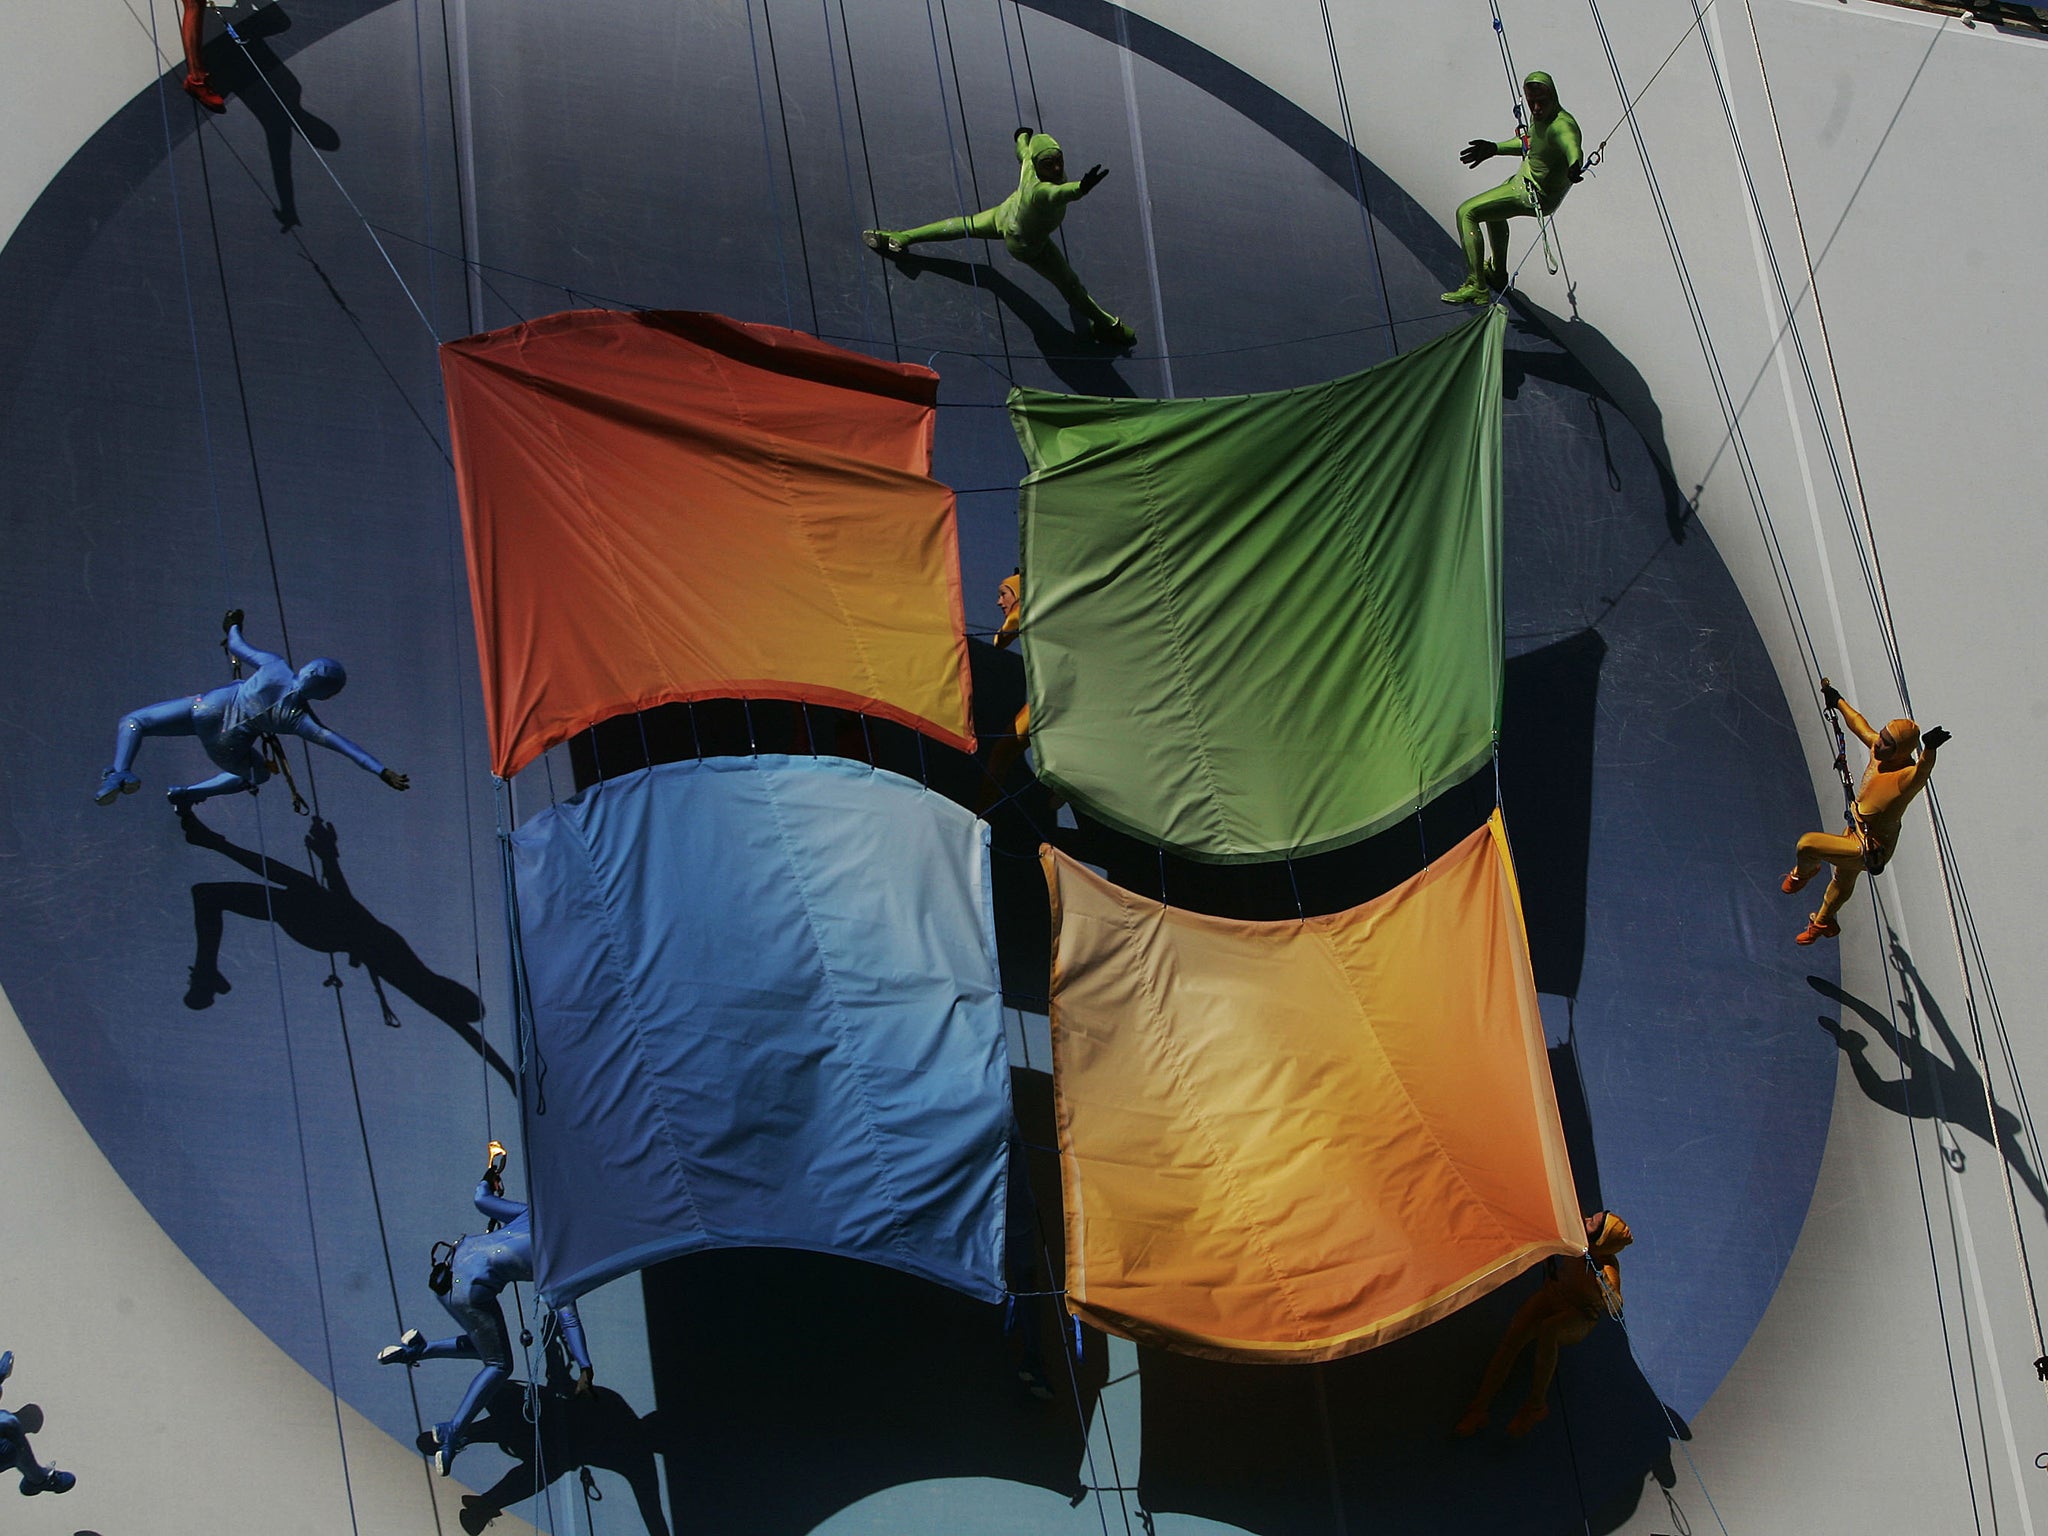 Members of the 'GROUNDED Aerial Dance Theater' hang from ropes and dance on a poster promoting Vista, a new version of Microsoft Windows, on the side of a warehouse building on Manhattan's west side January 29, 2007 in New York